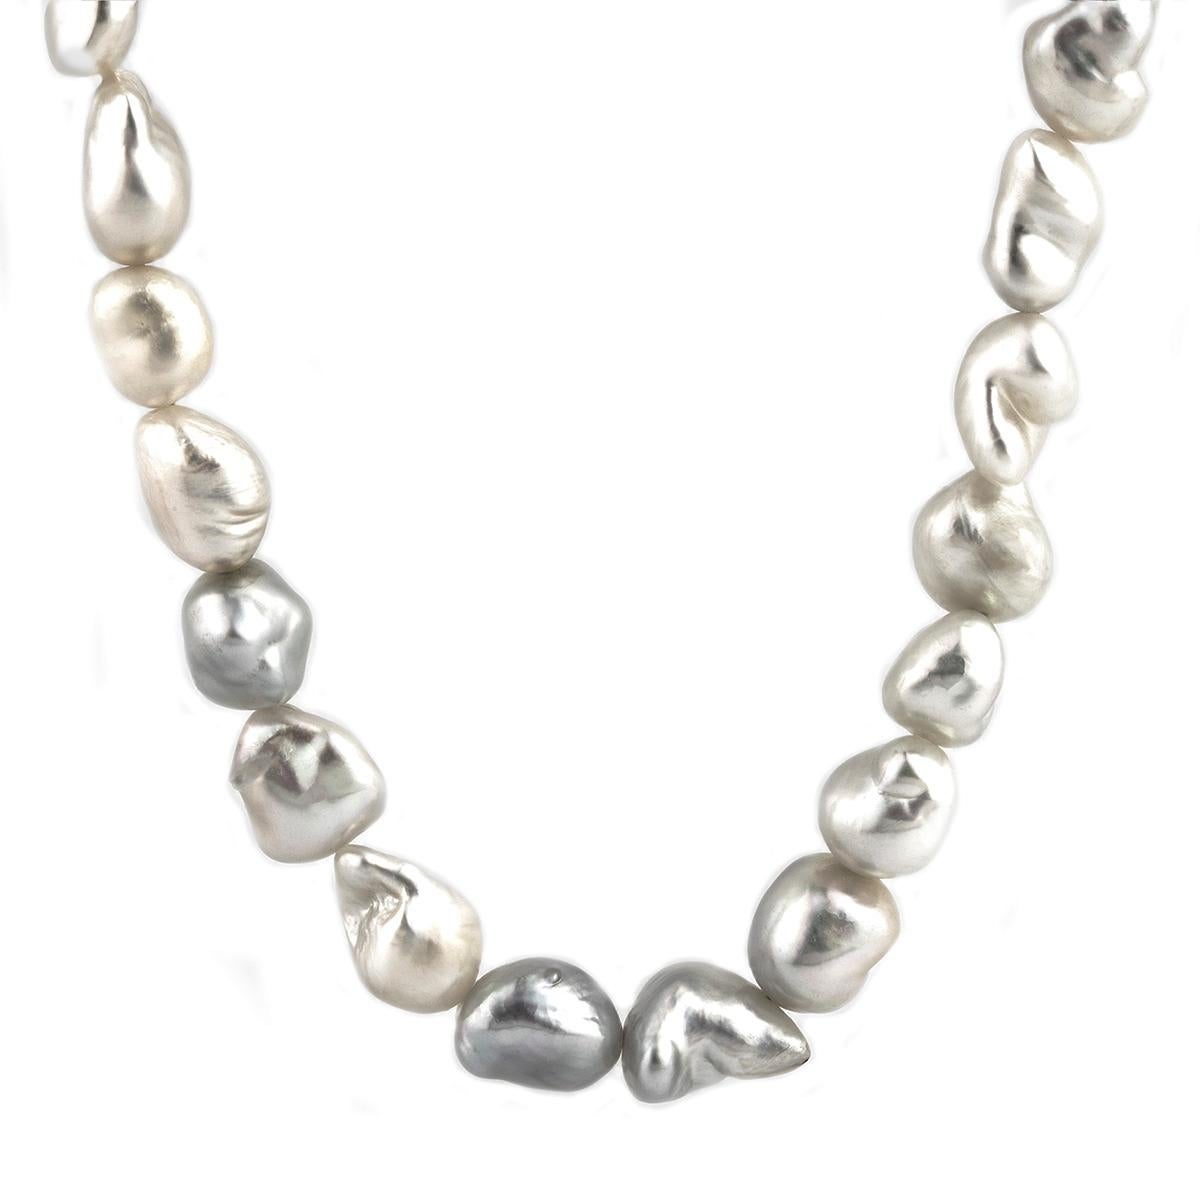 Large Grey, Cream and White Keshi Pearl Necklace on 9 Carat Gold